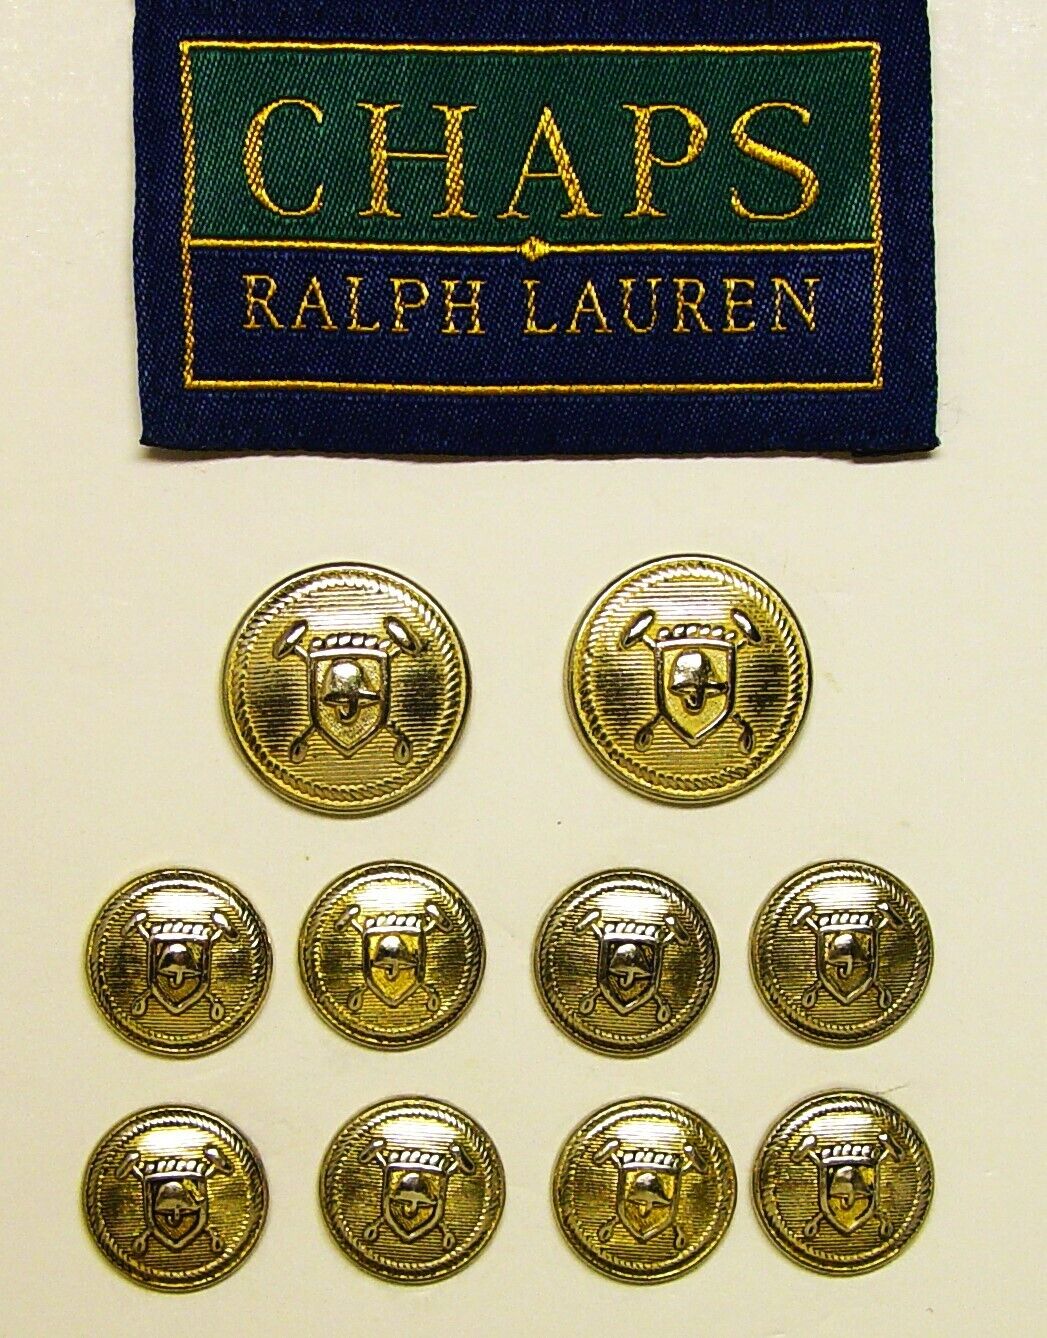 CHAPS REPLACEMENT BUTTONS 10 PC by RALPH LAUREN LIGHT GOLD TONE  METAL GOOD COND